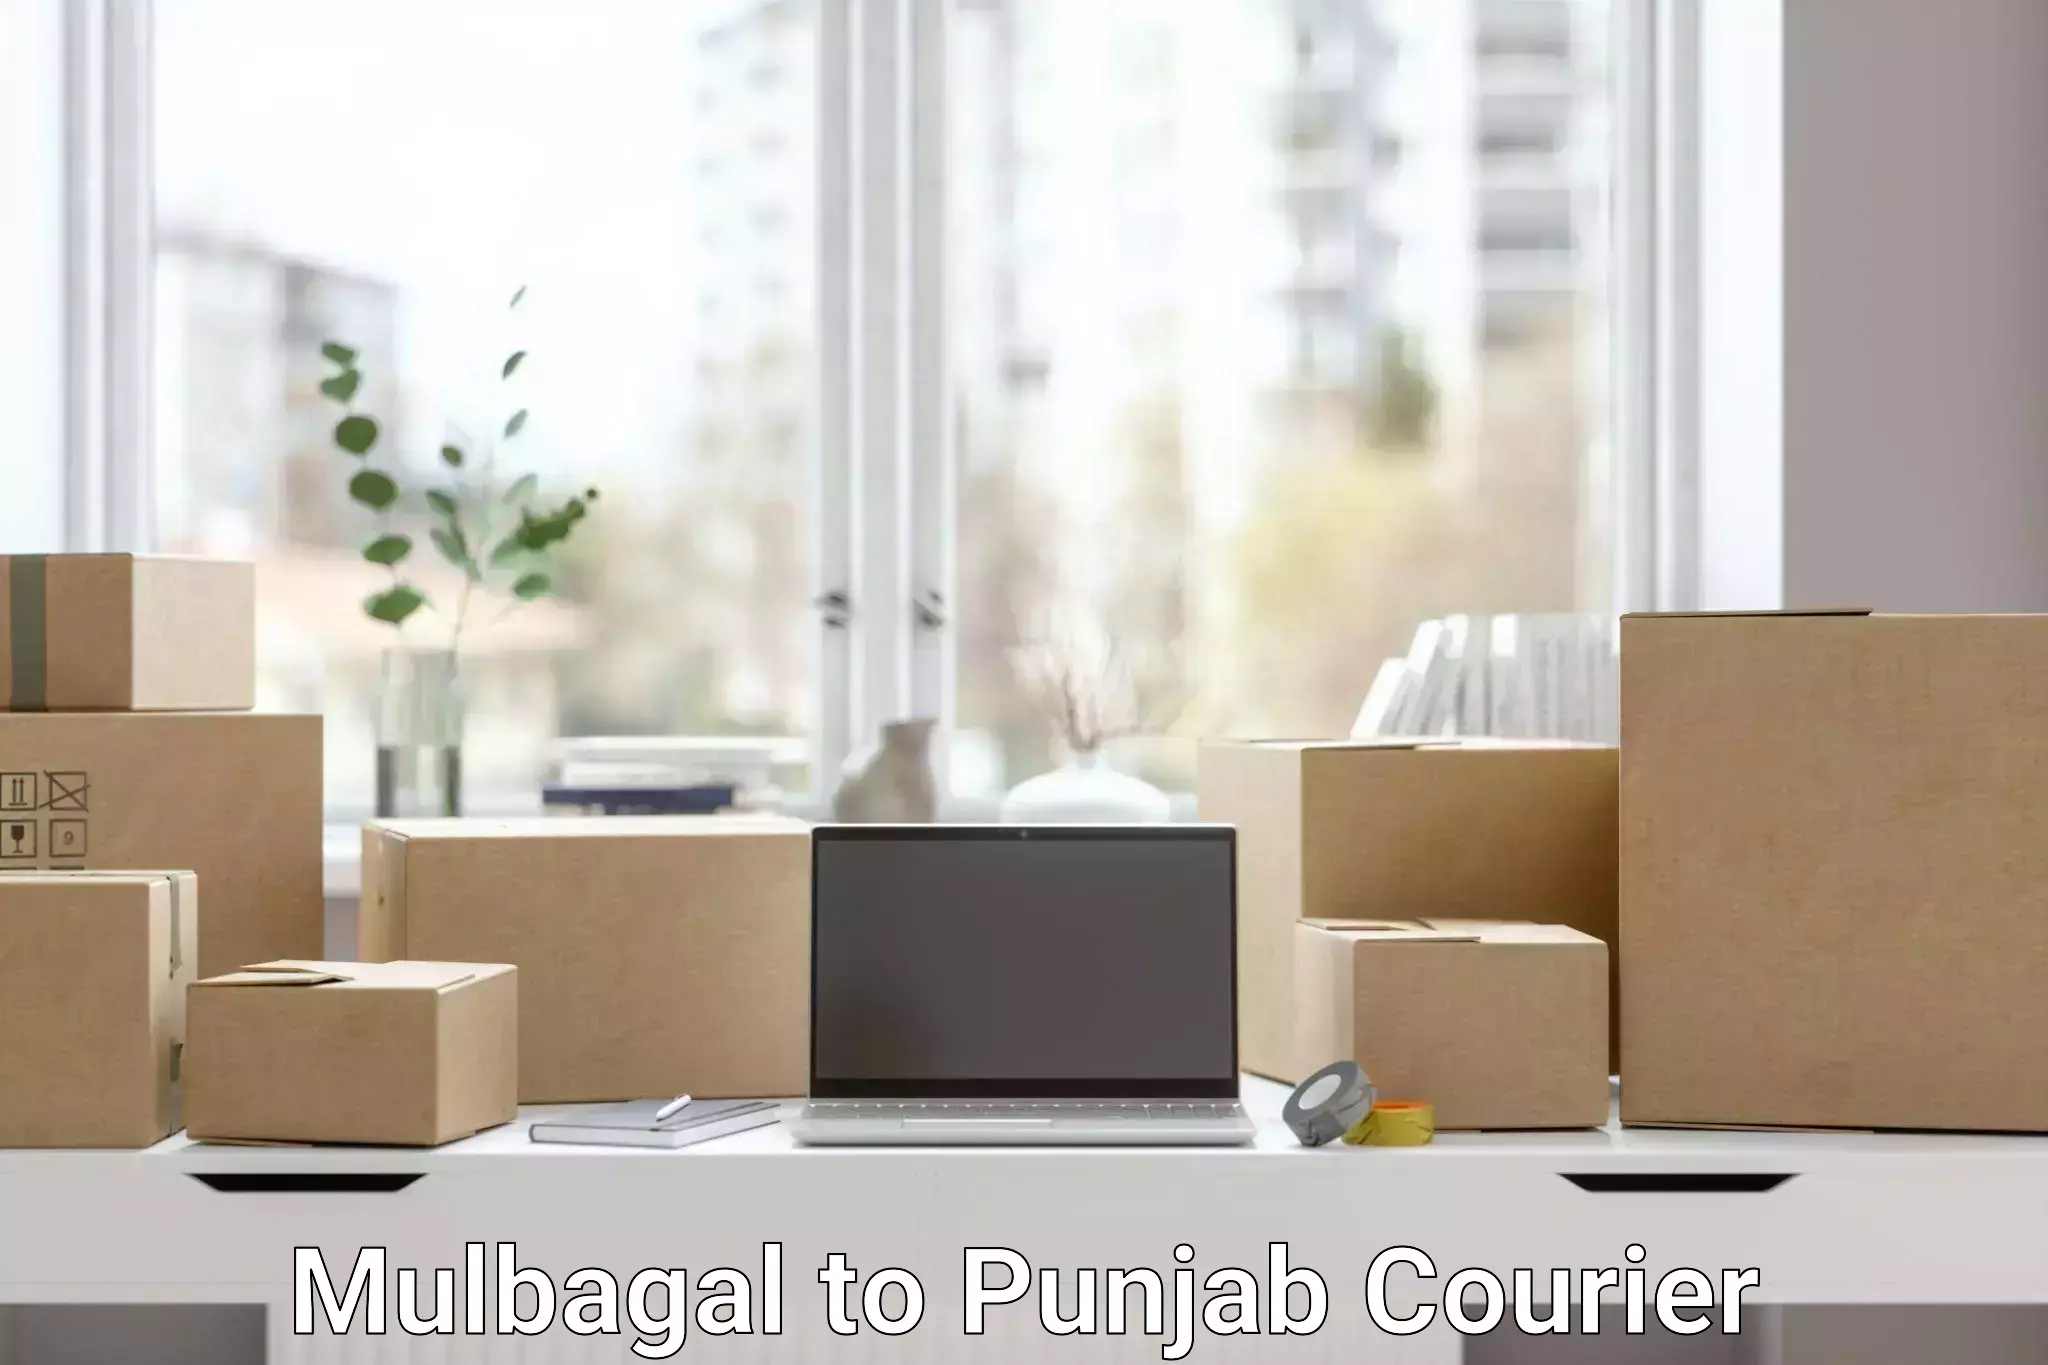 Delivery service partnership Mulbagal to Ludhiana